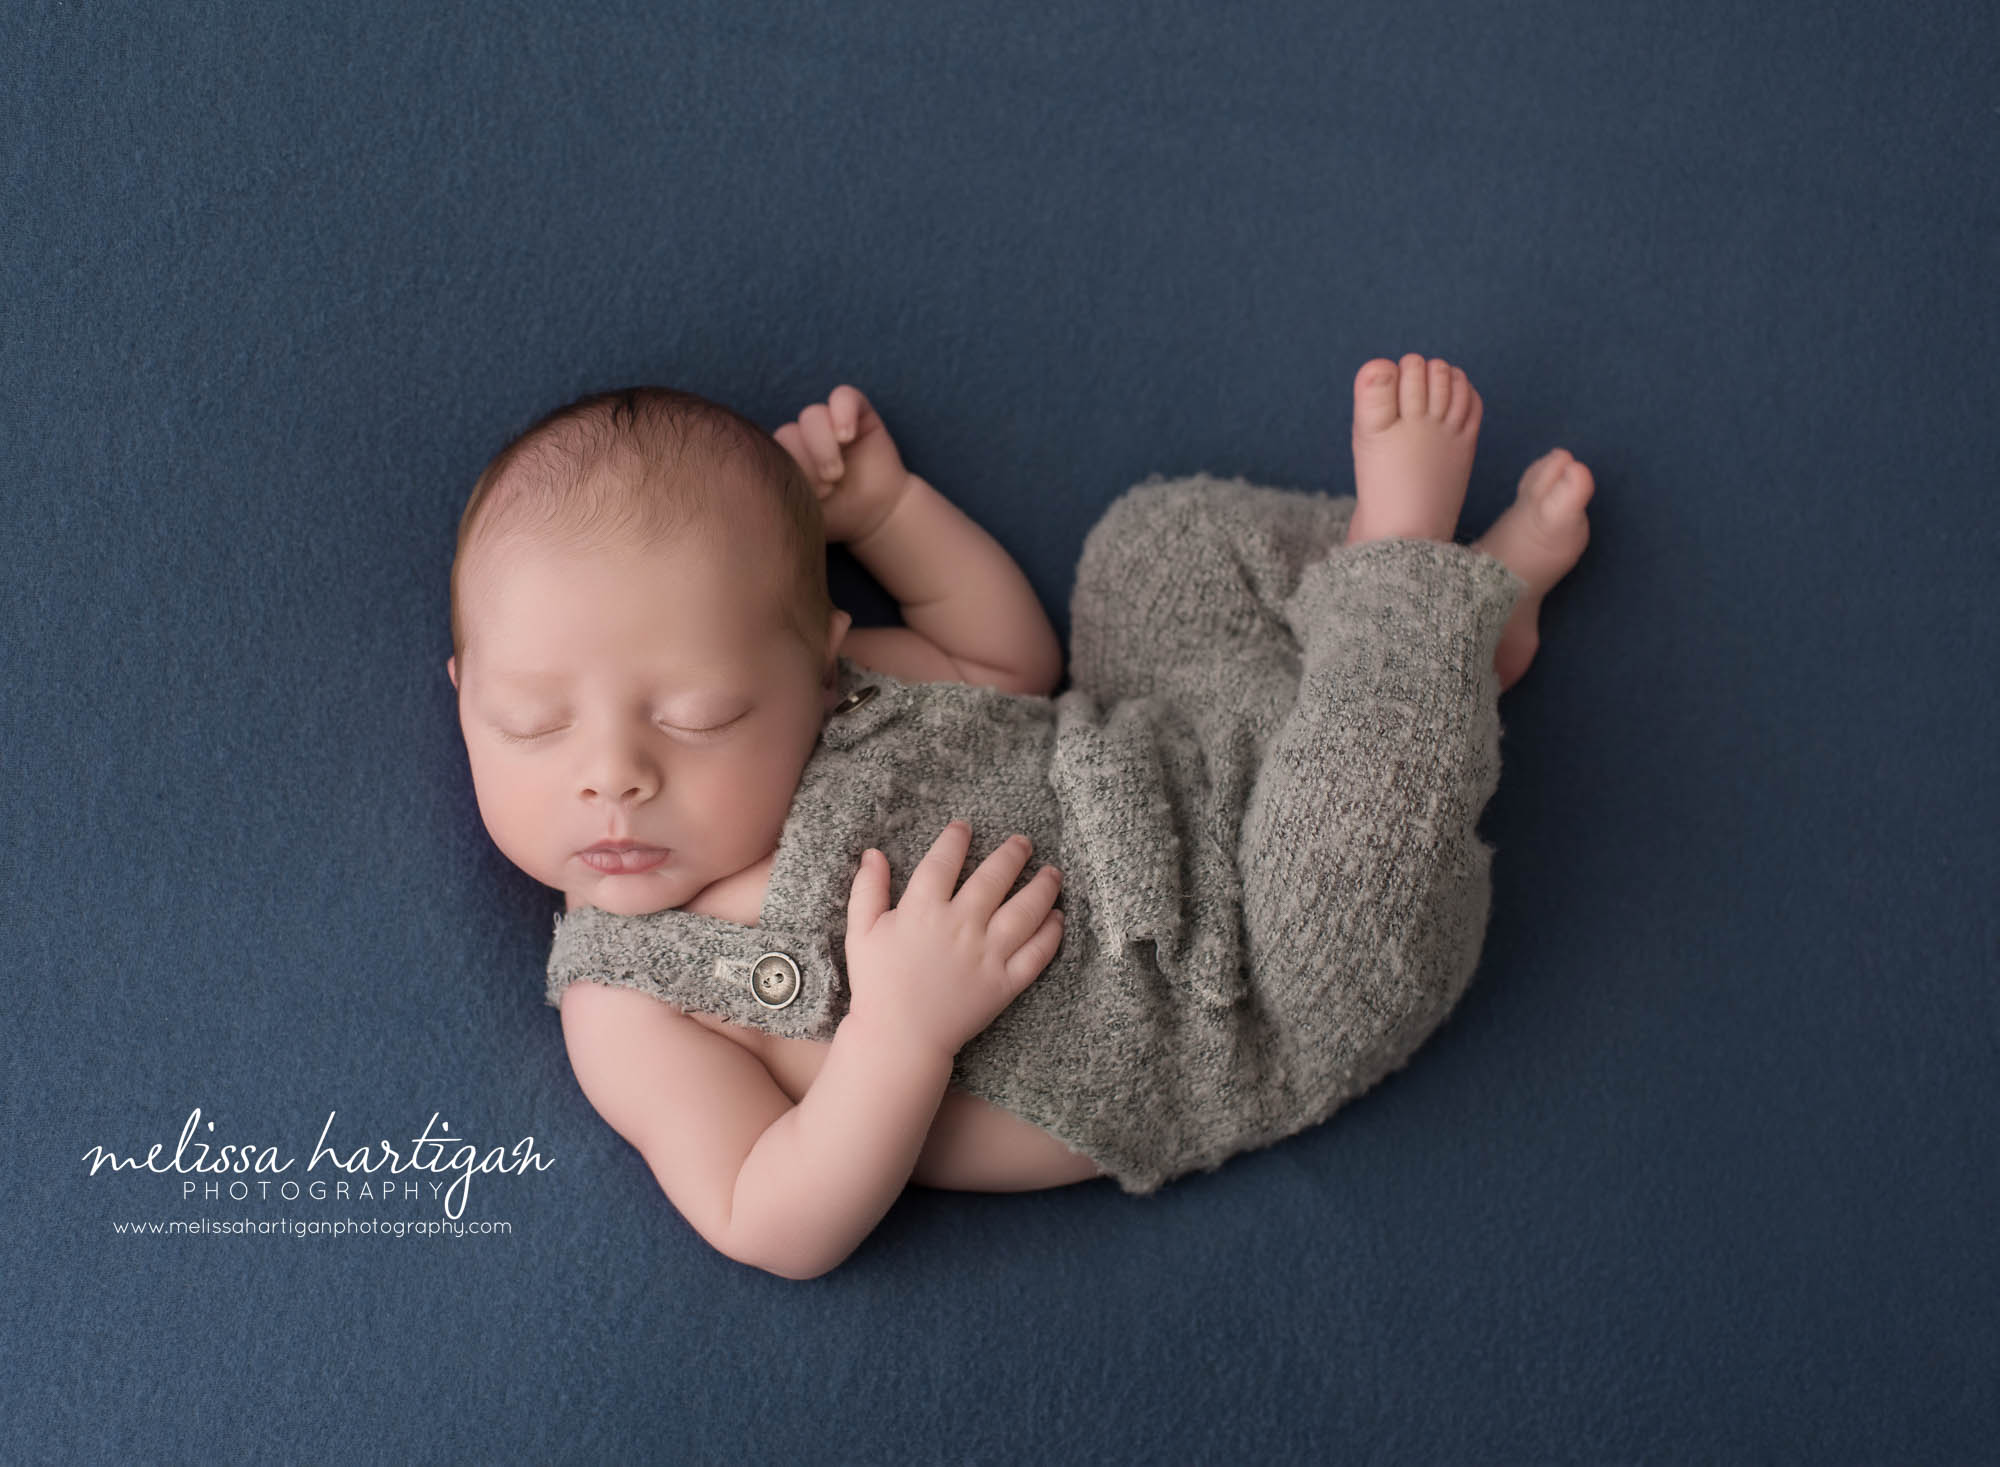 newborn baby boy wearing gray outfit posed on back sleeping